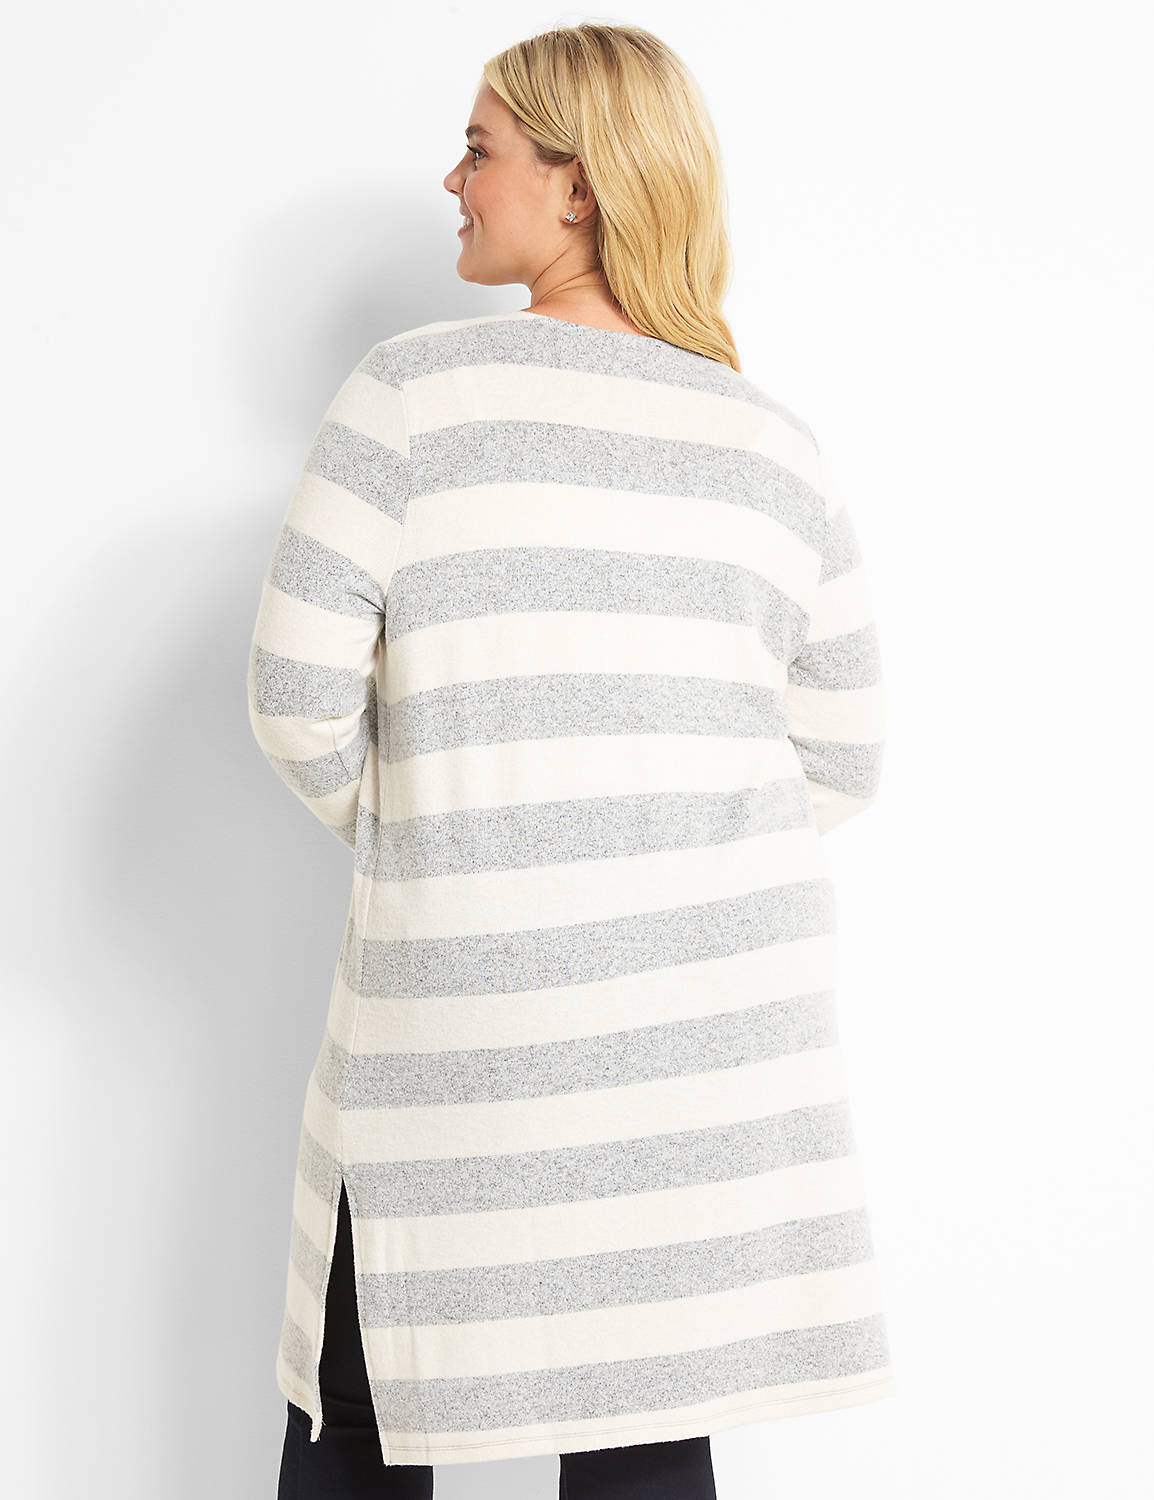 Long Sleeve Vneck Button Front Drama Knit Top 1123029:Stripe:10/12 Product Image 2